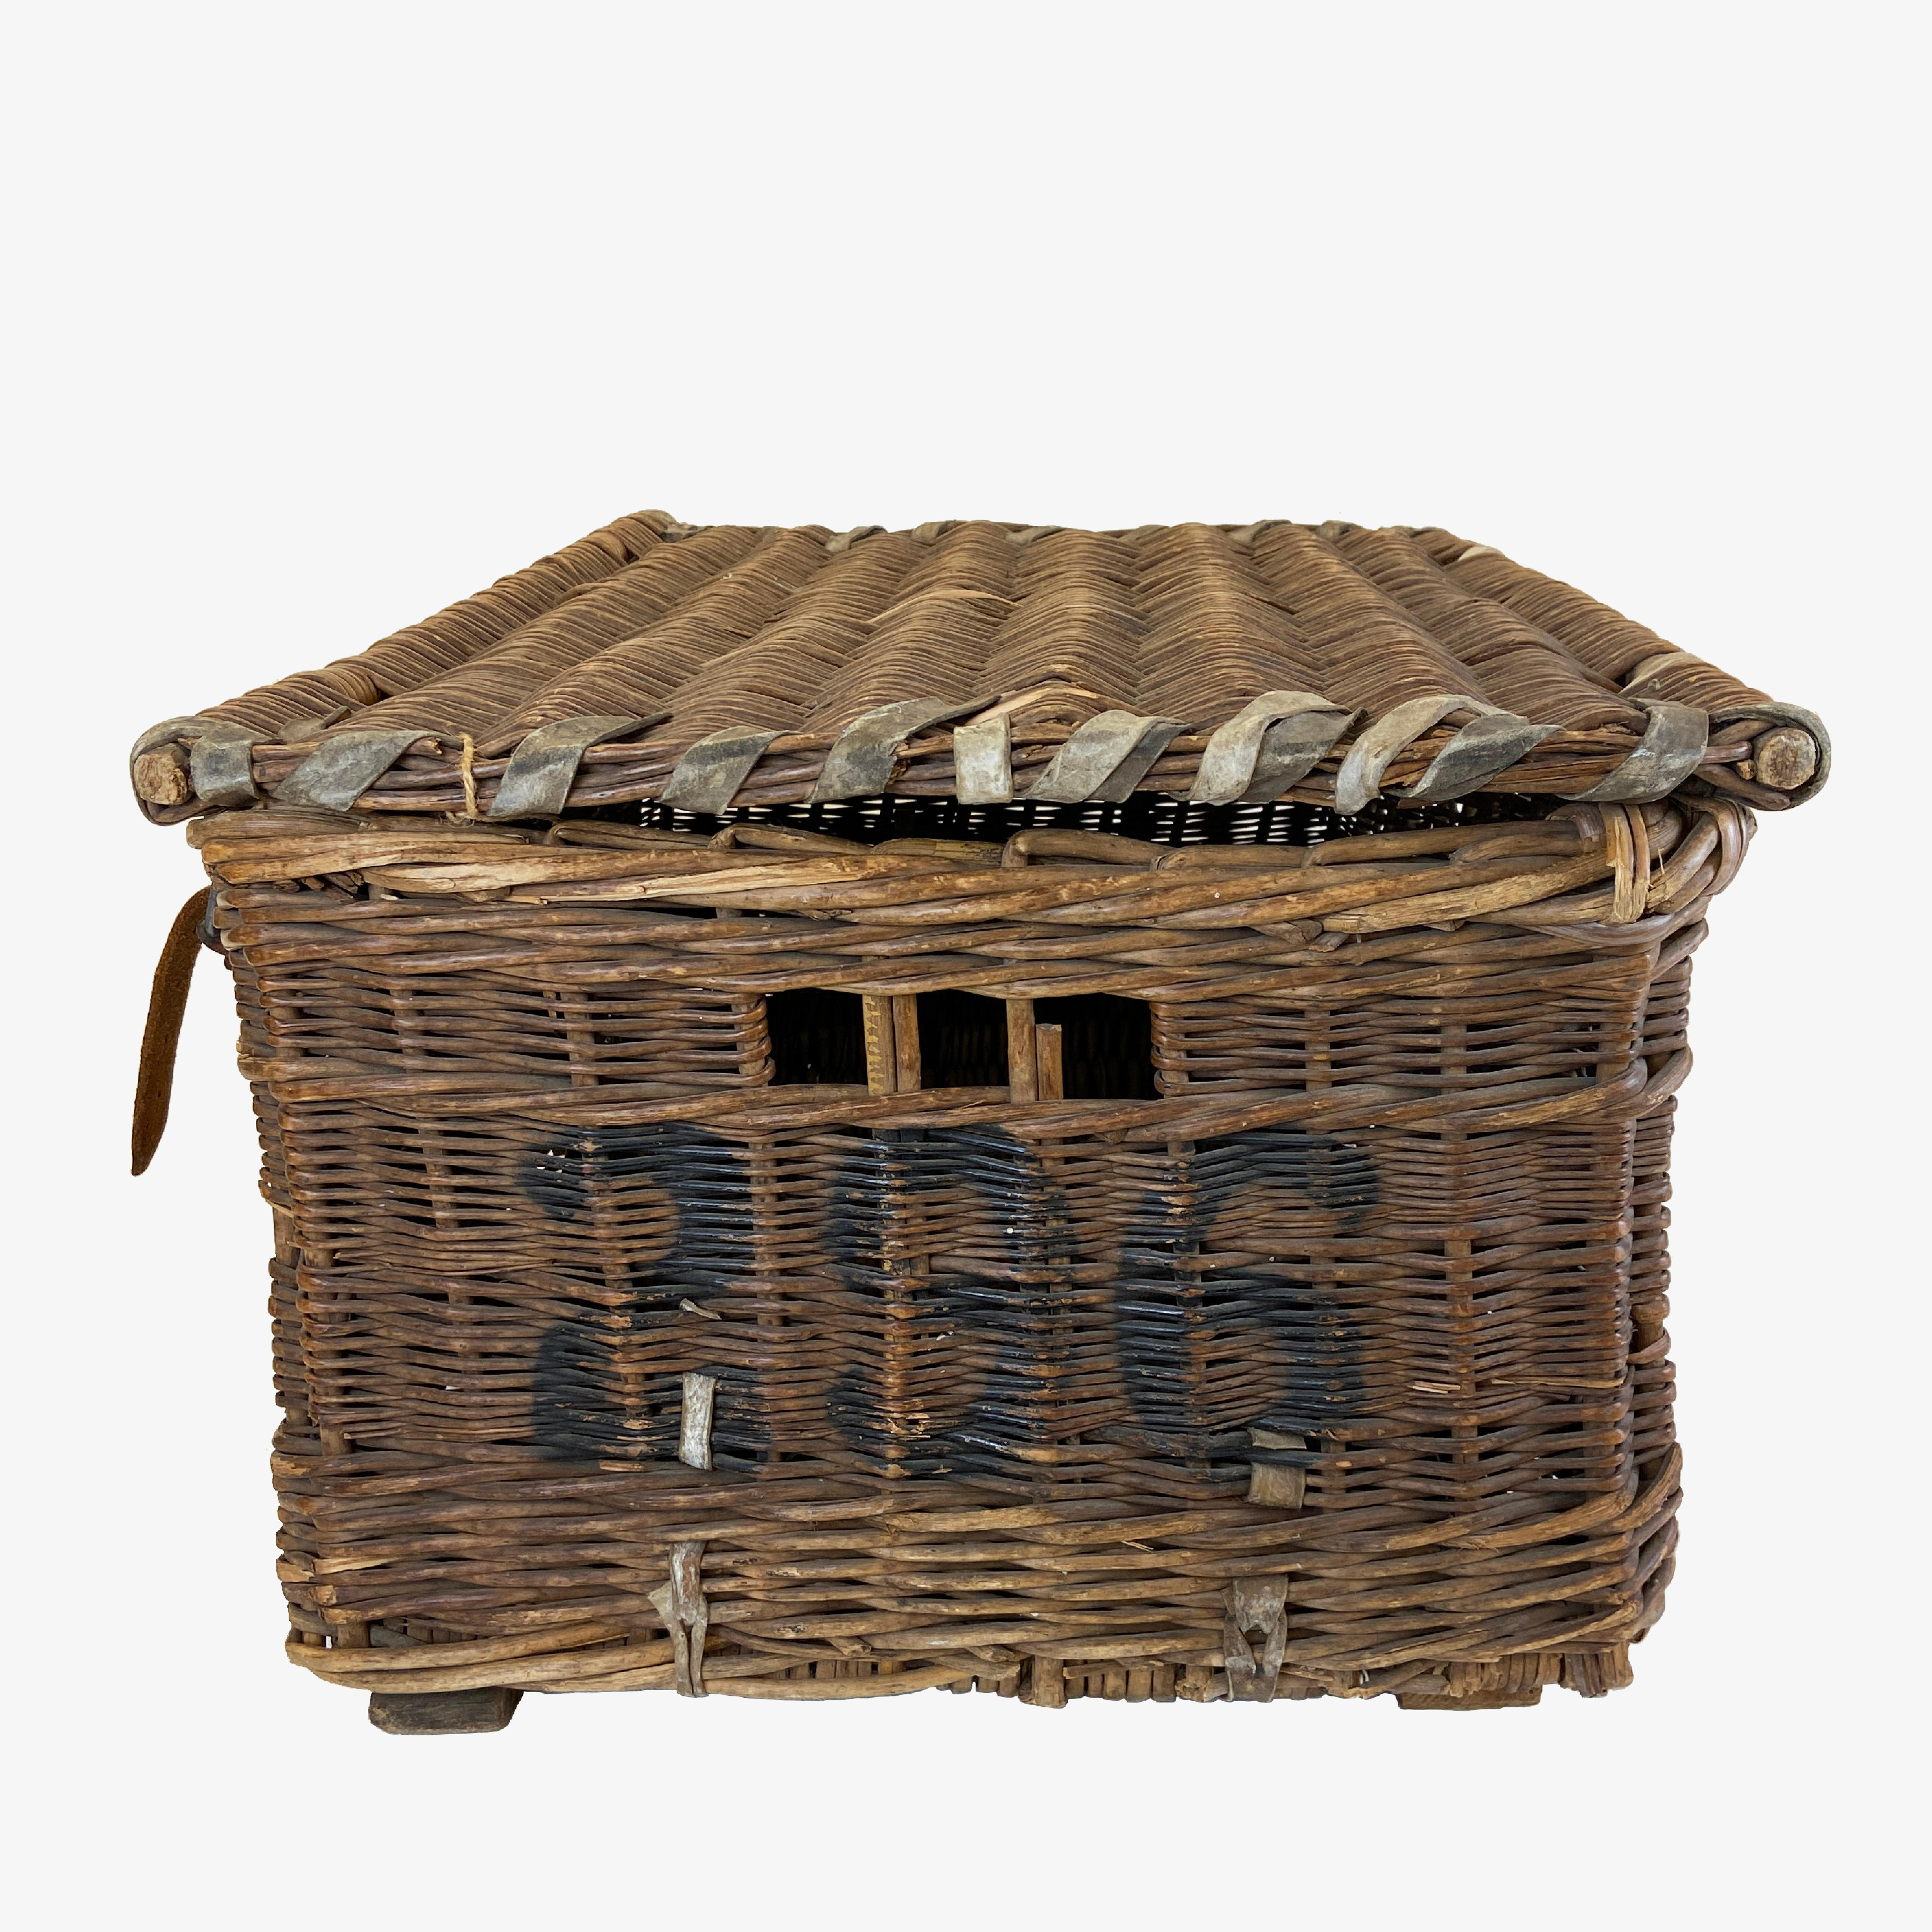 This vintage wicker laundry basket is from Caversham, England. It has a hinged lid and leather enclosure straps with original hardware. The basket is fastened with wood blocks on the bottom. As seen in the 3rd photo, it has a slight tilt which gives